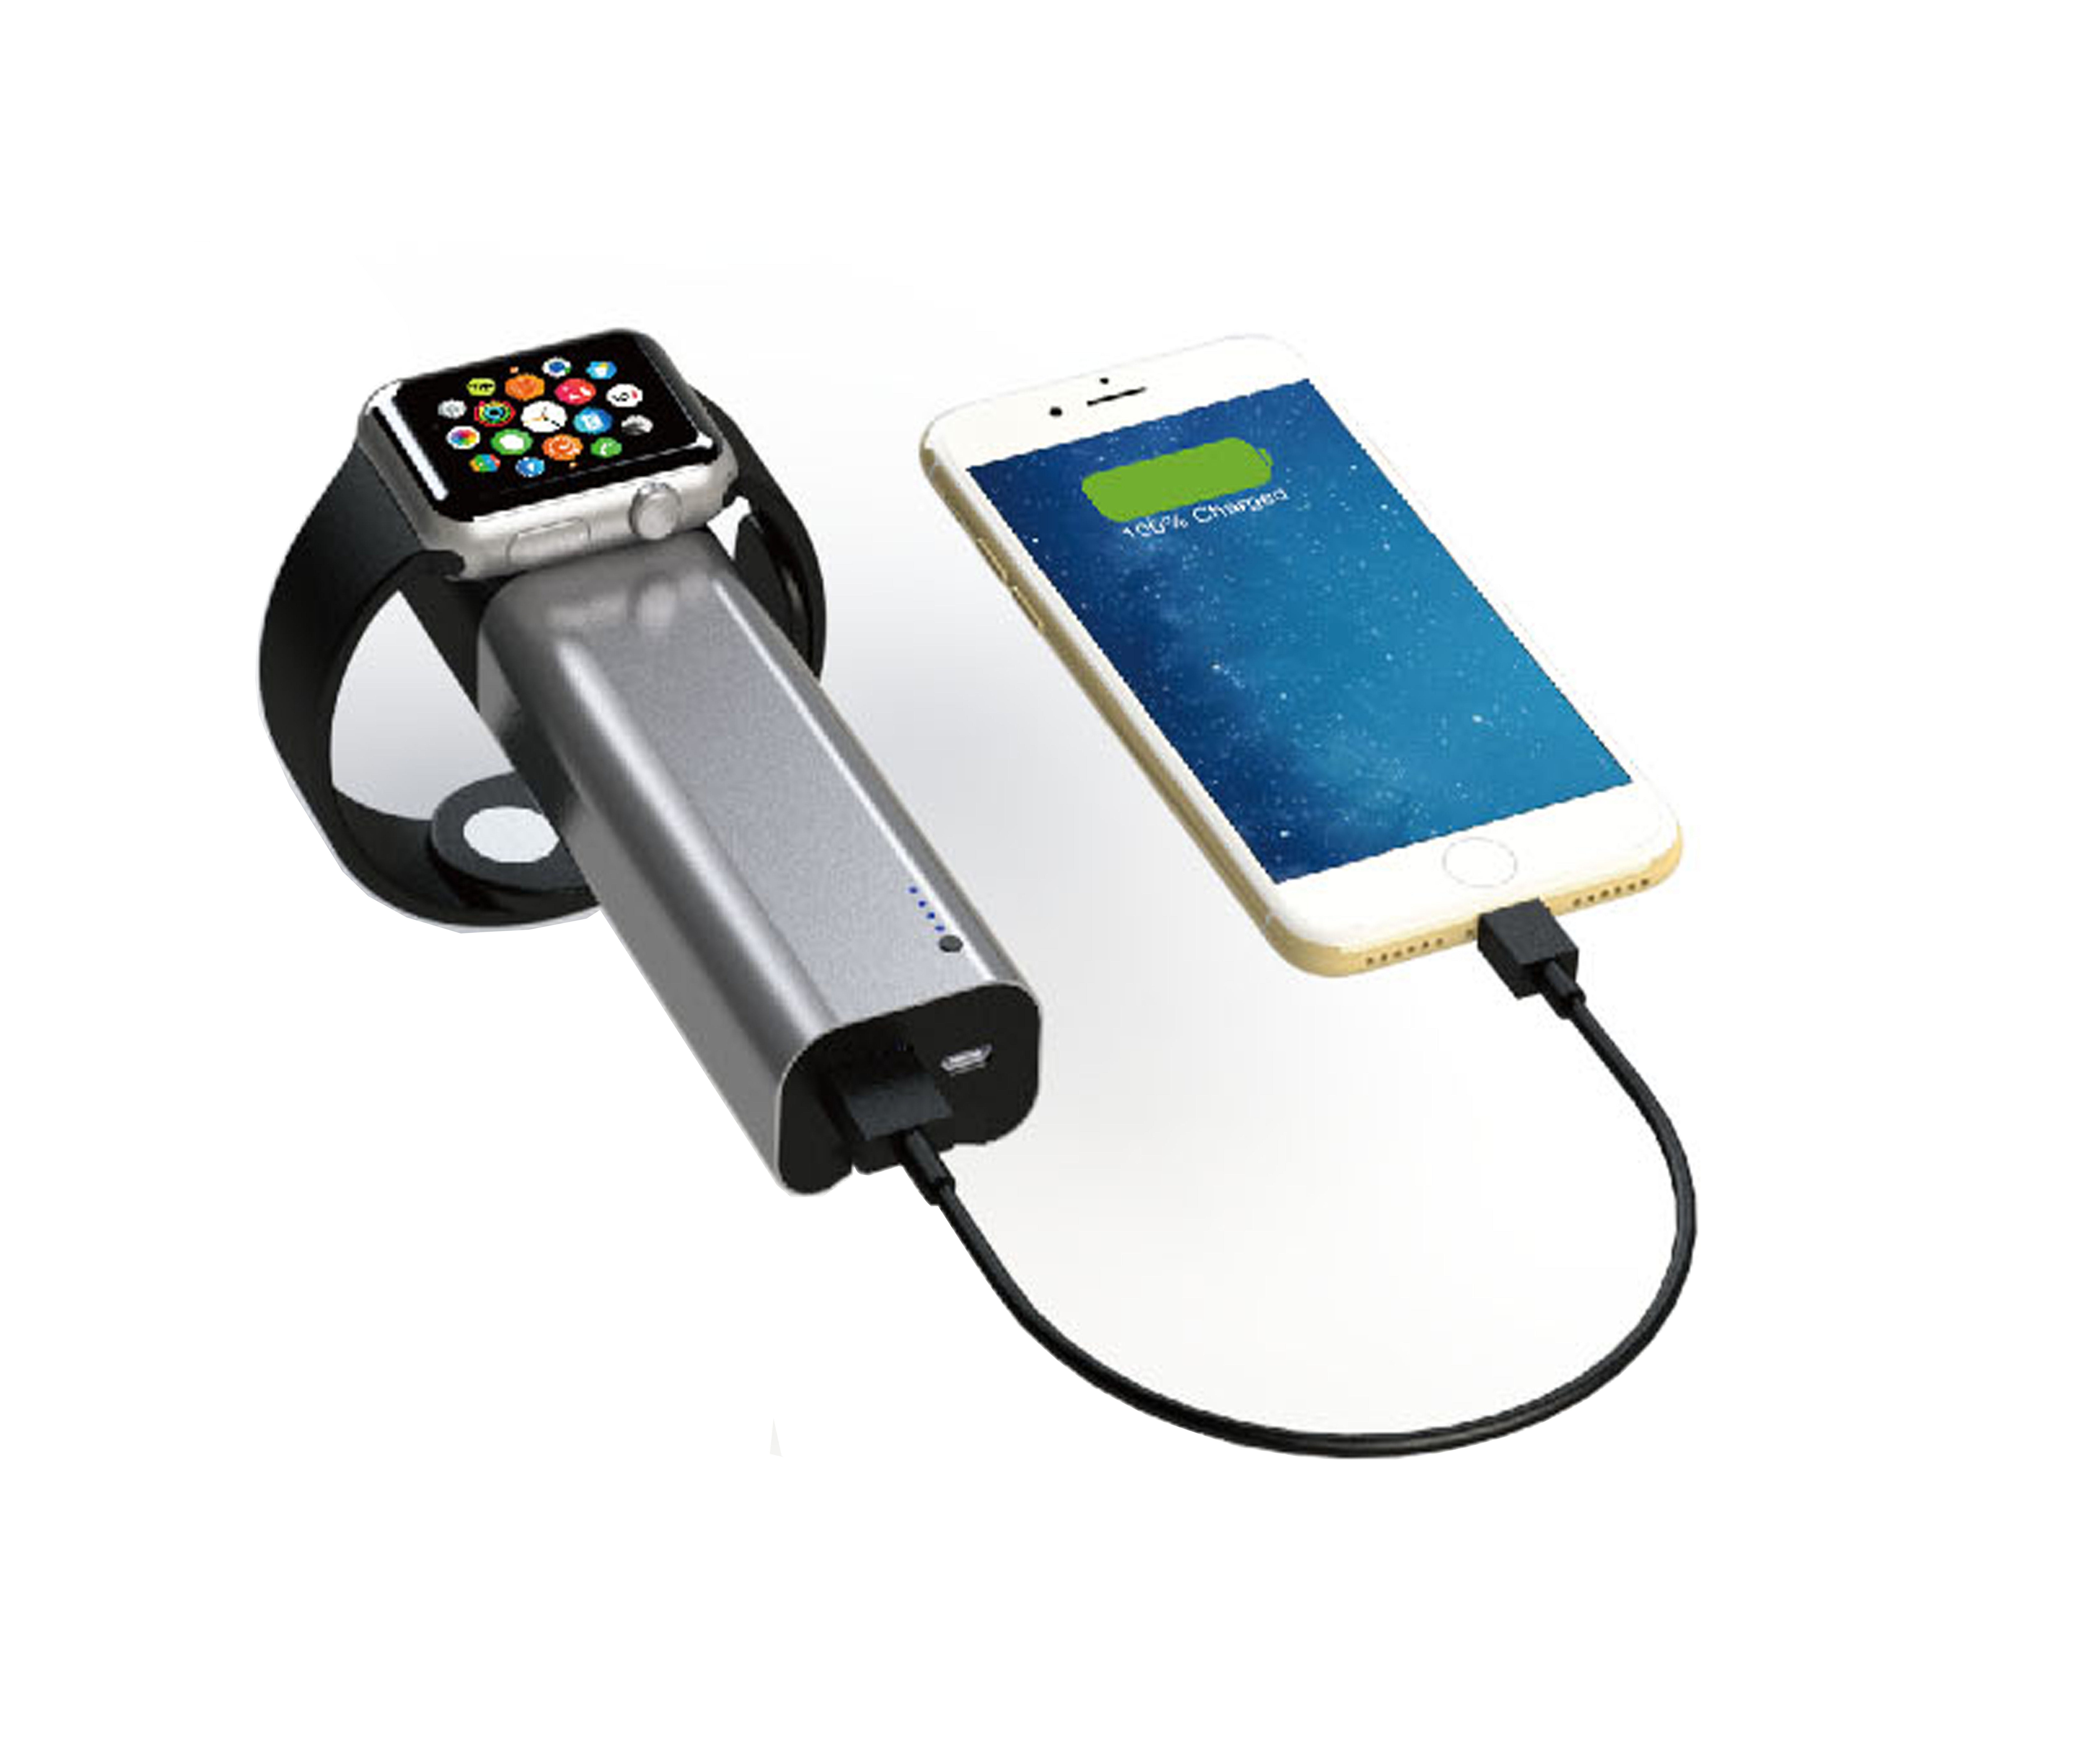 PS-214B Power Bank with Built-in Apple Watch Charger